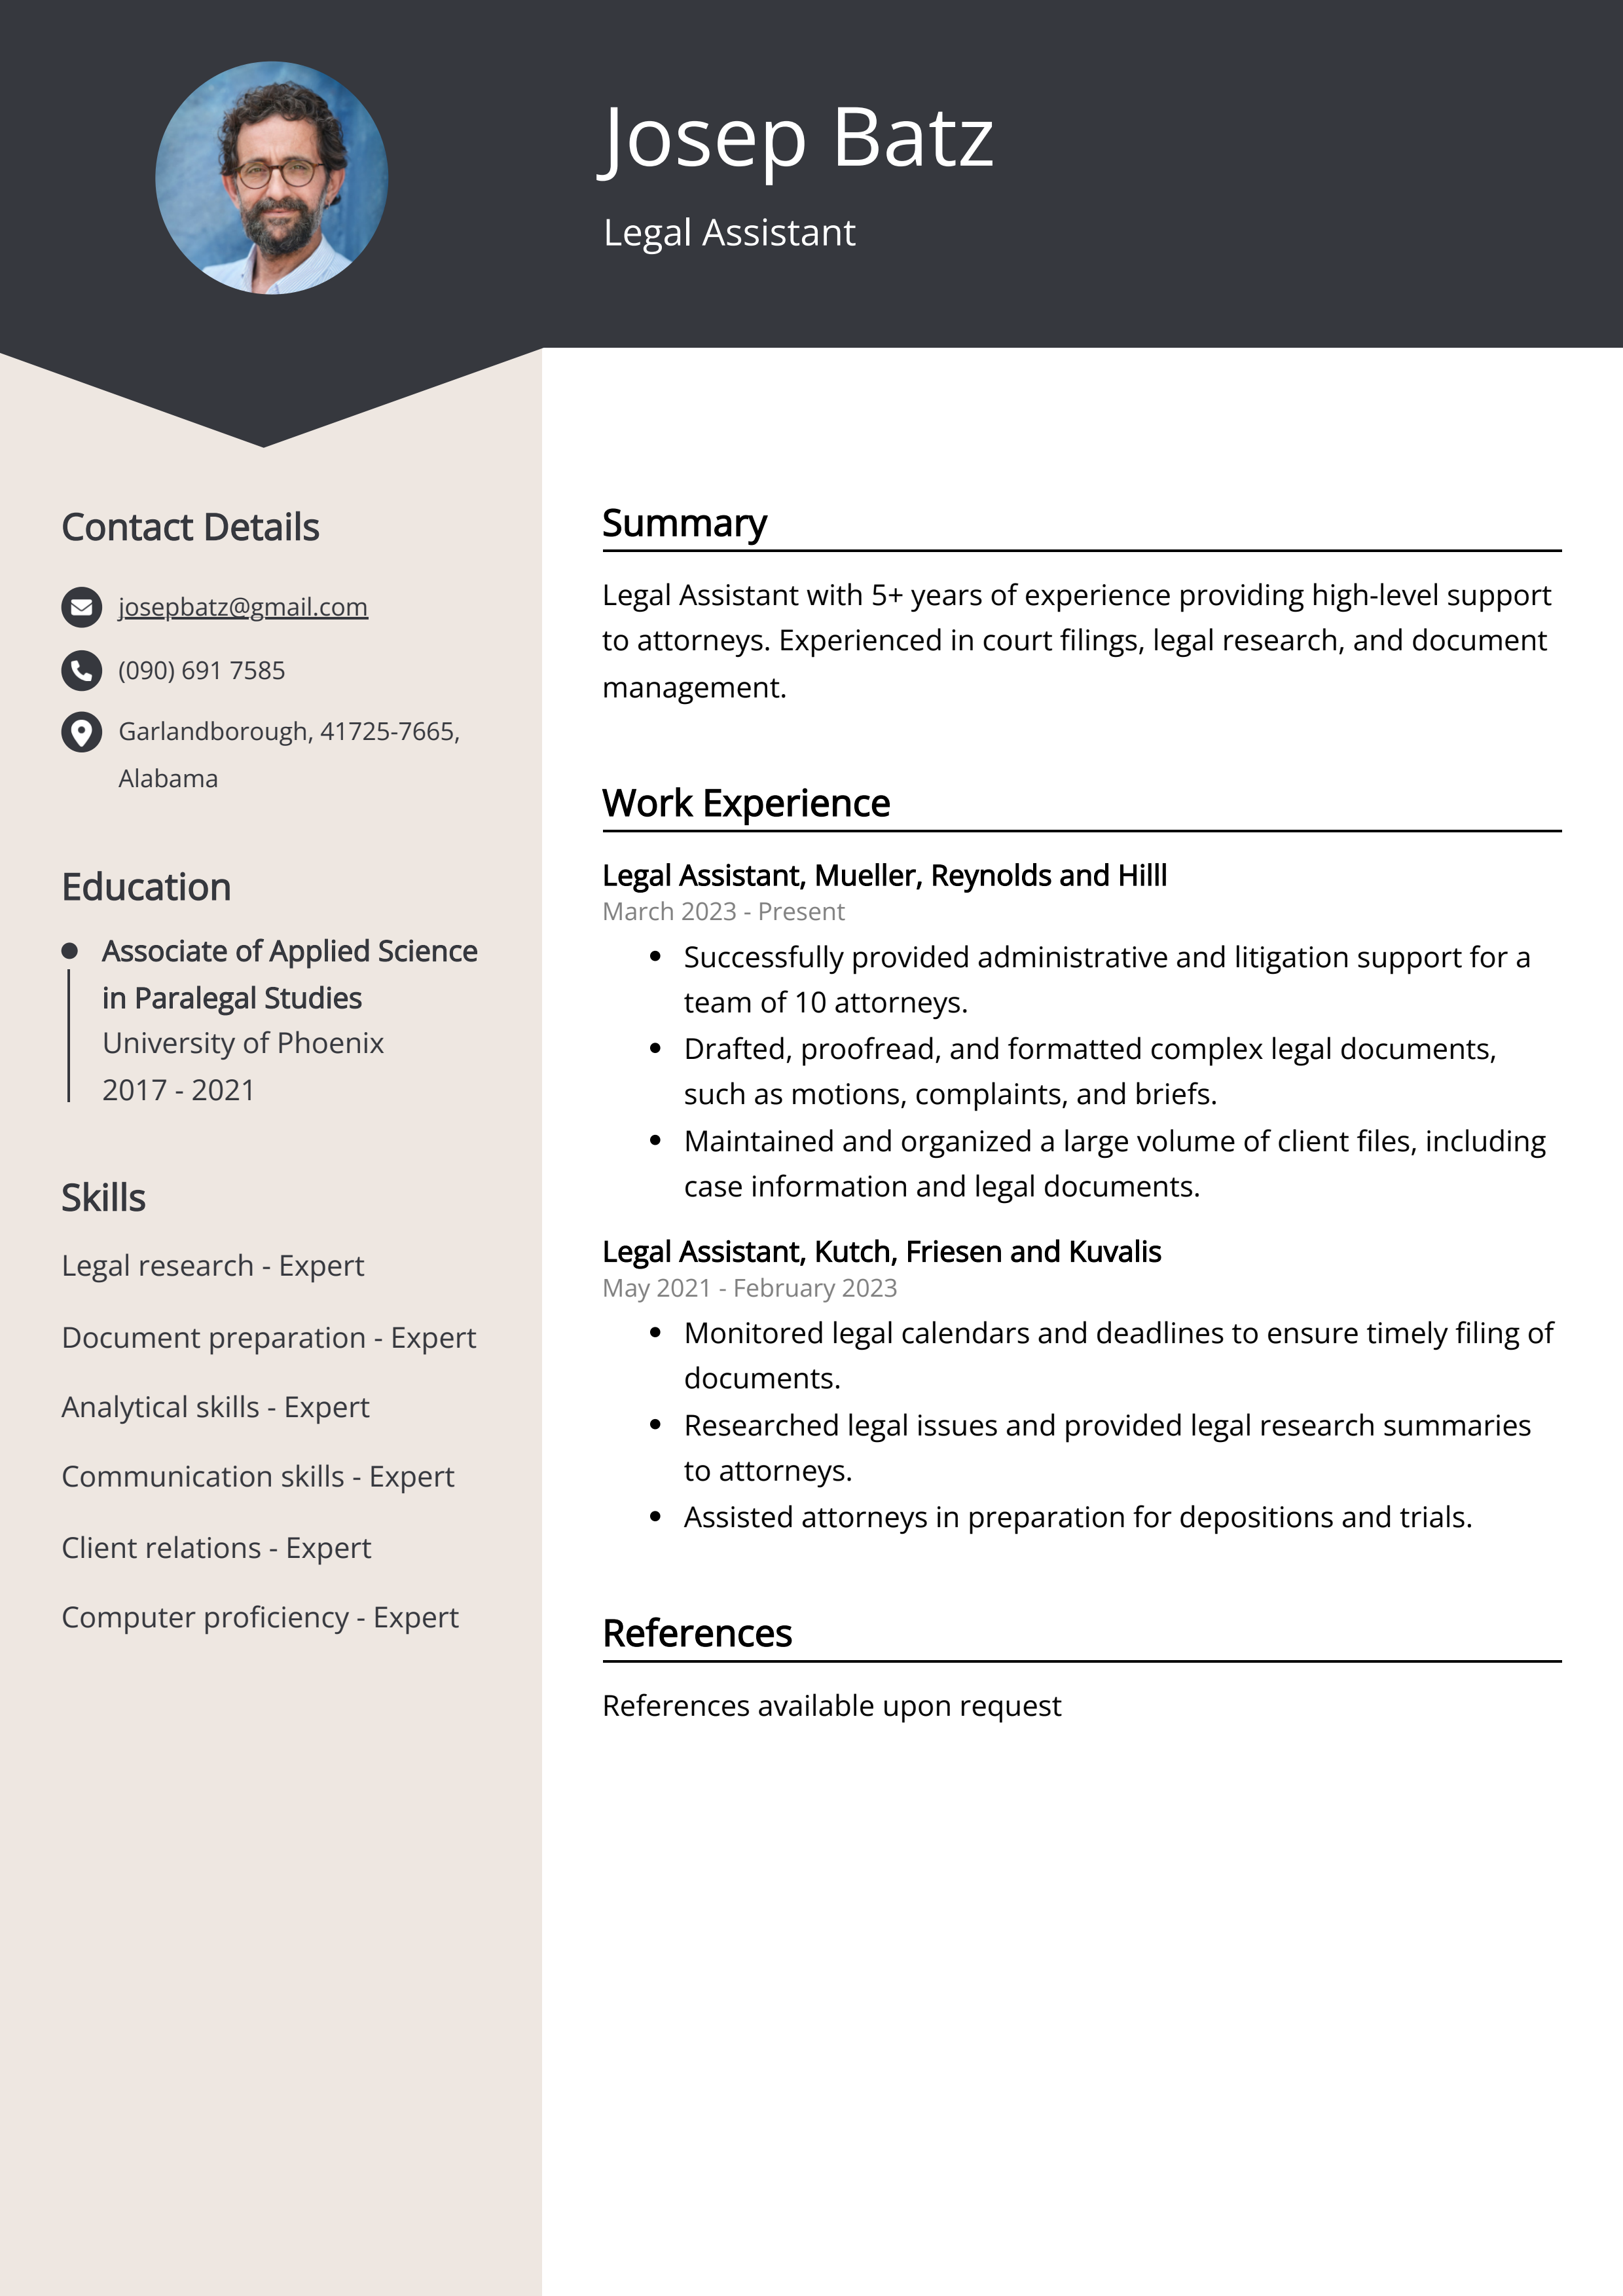 Legal Assistant Resume Example